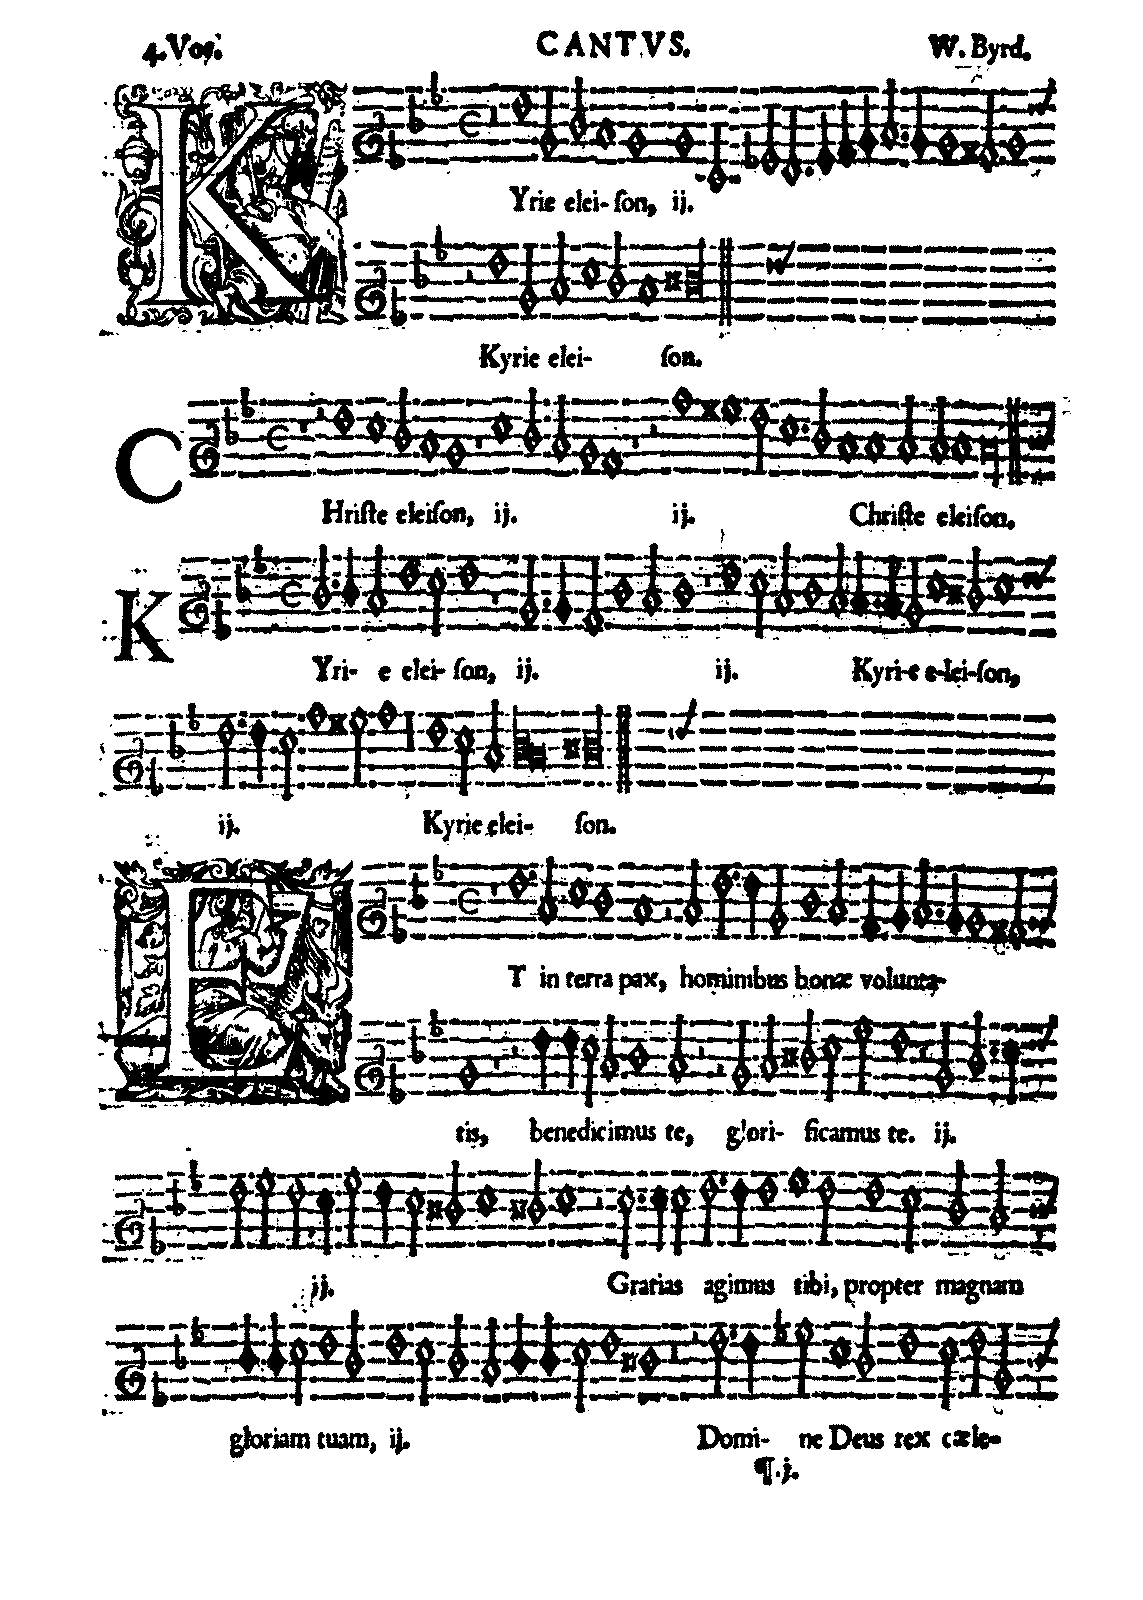 Together Alone with William Byrd. Manuscript cover page, Cantus part, 'Kyrie', from the 'Mass for Four Voices' by William Byrd